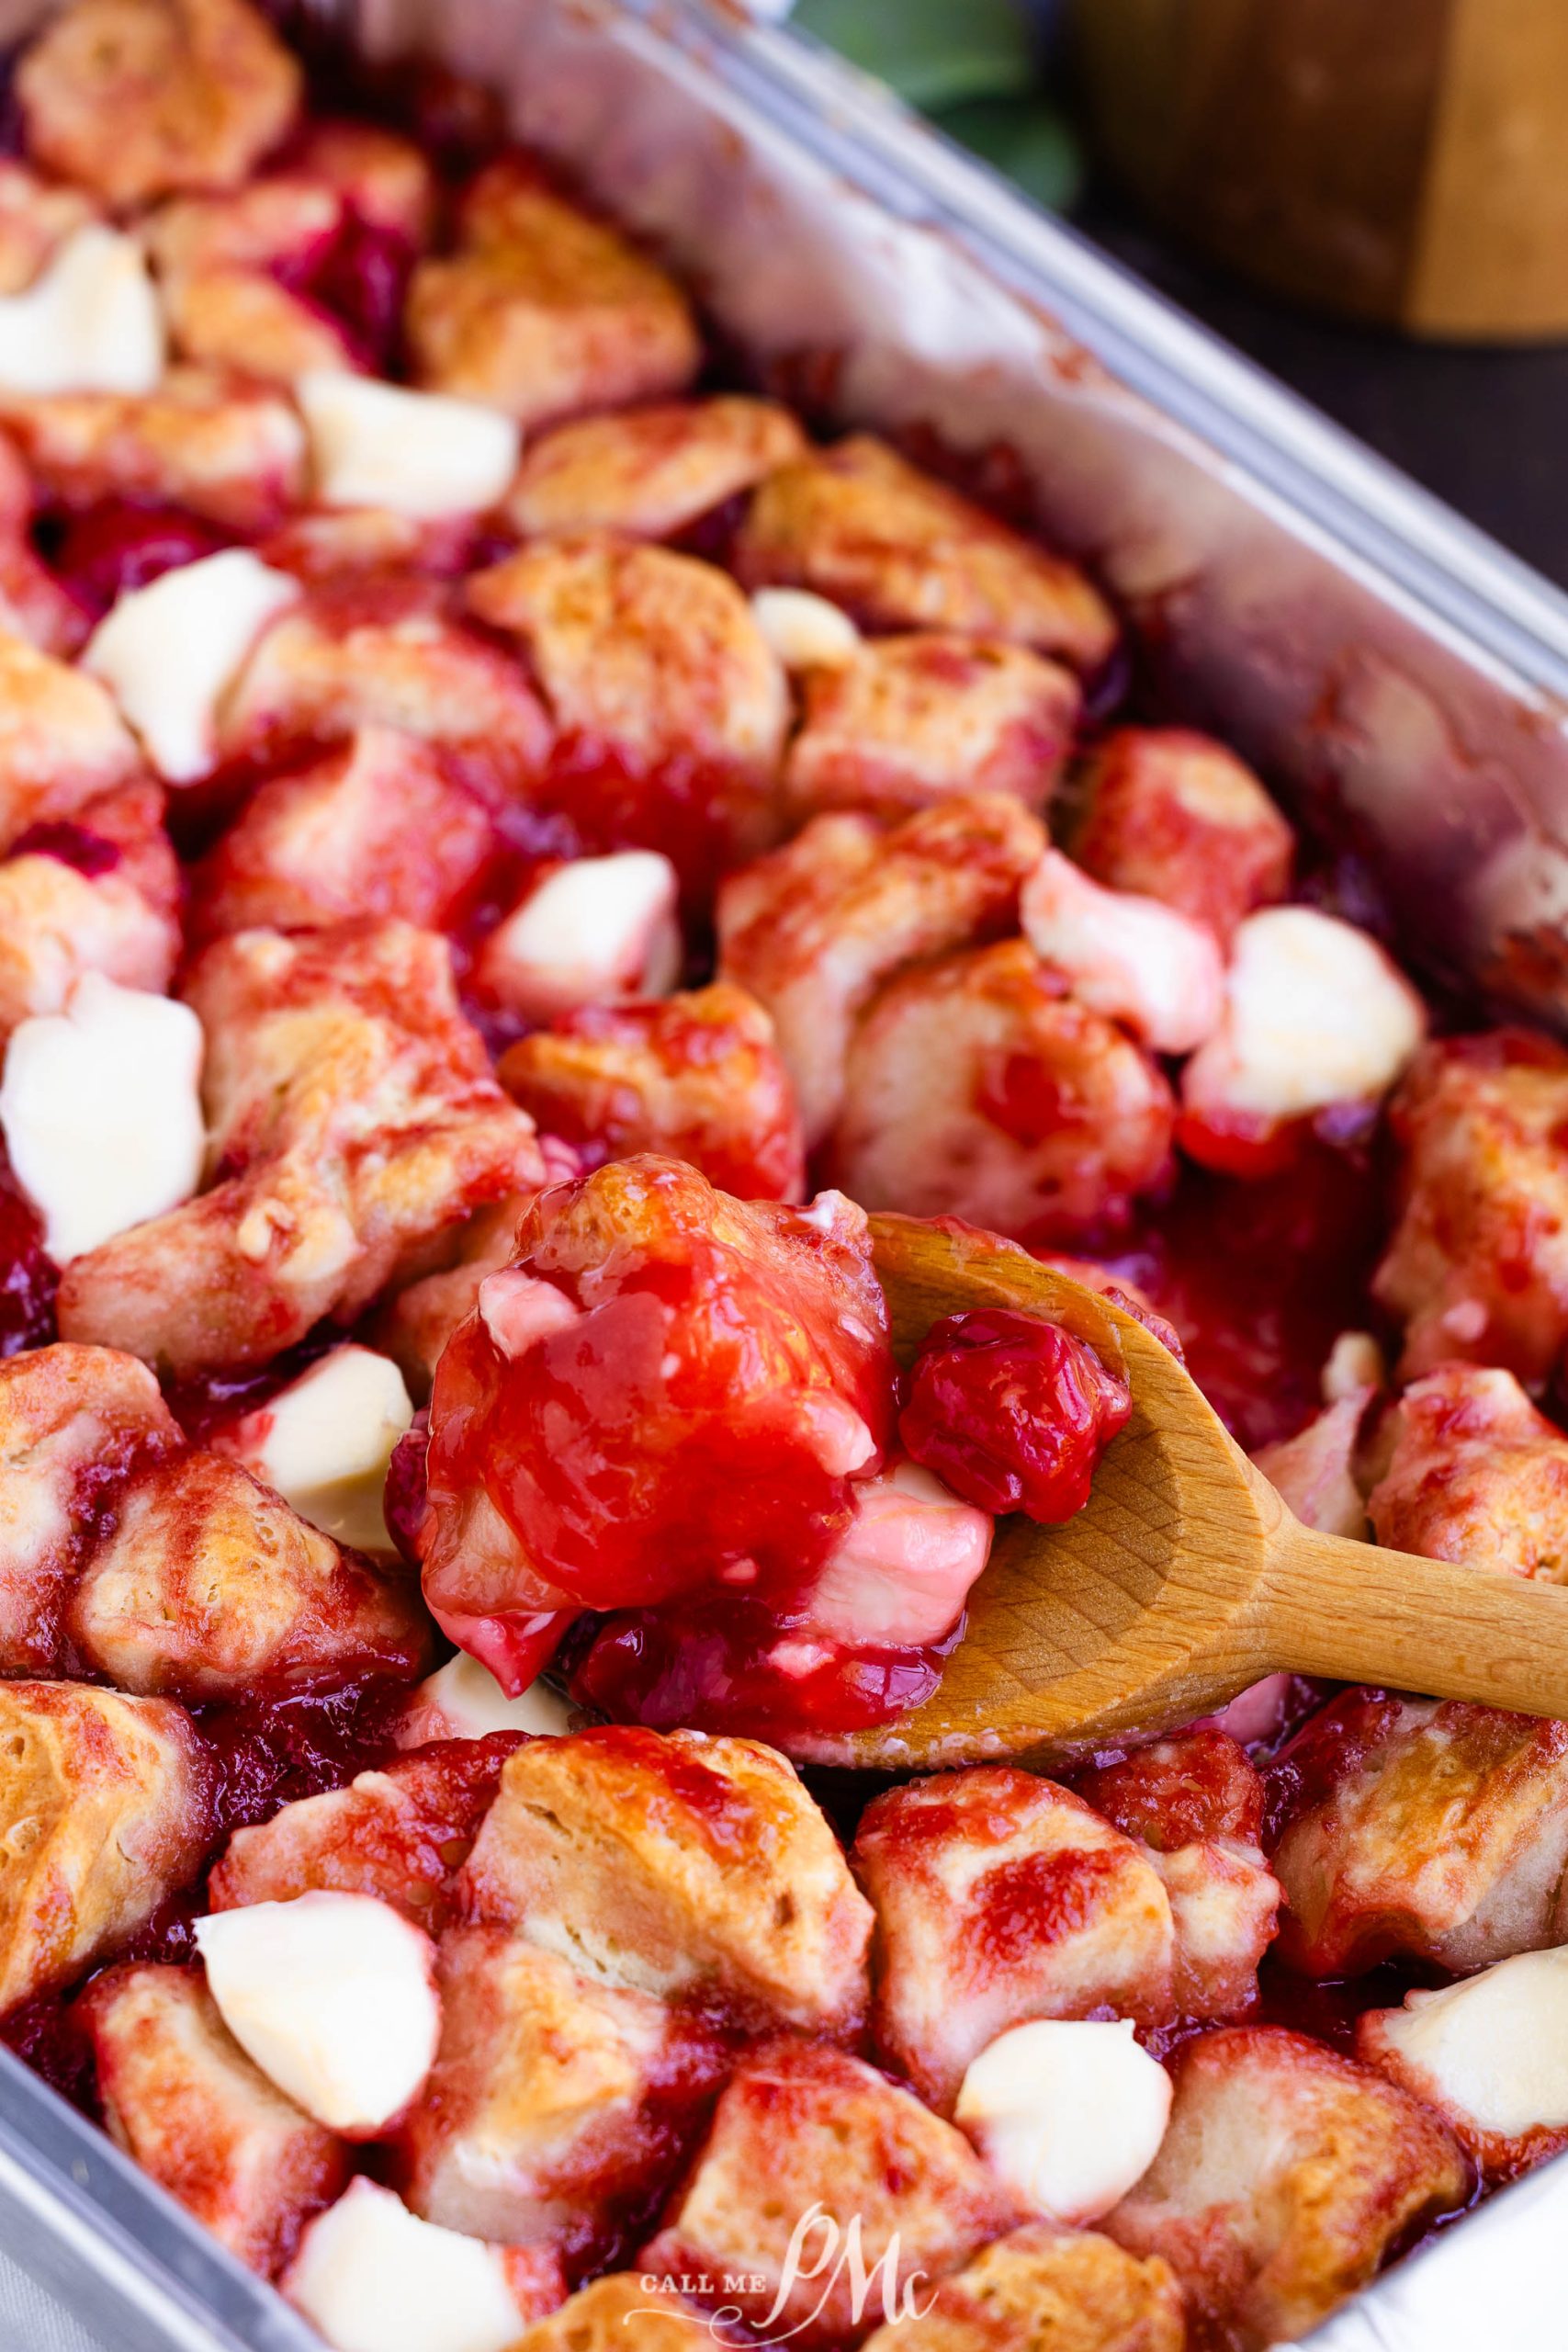 A close-up of a baking dish filled with a bread-based dessert topped with a red fruit sauce and chunks of white cheese, being stirred with a wooden spoon.